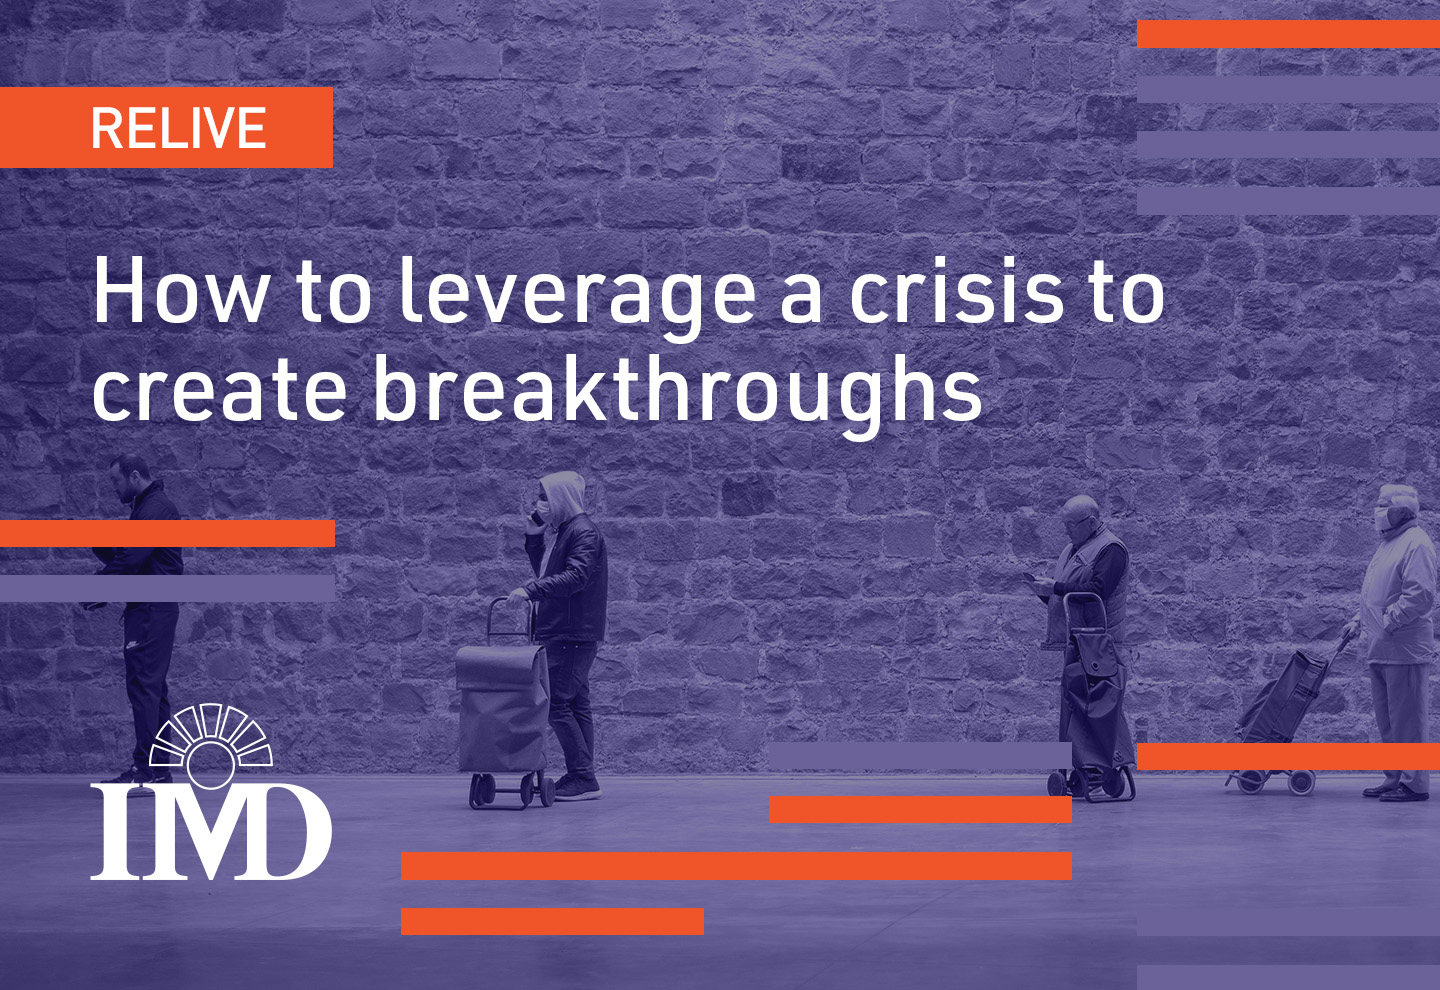 The six tips to ensure your organization has a breakthrough – and not a breakdown – in times of crisis